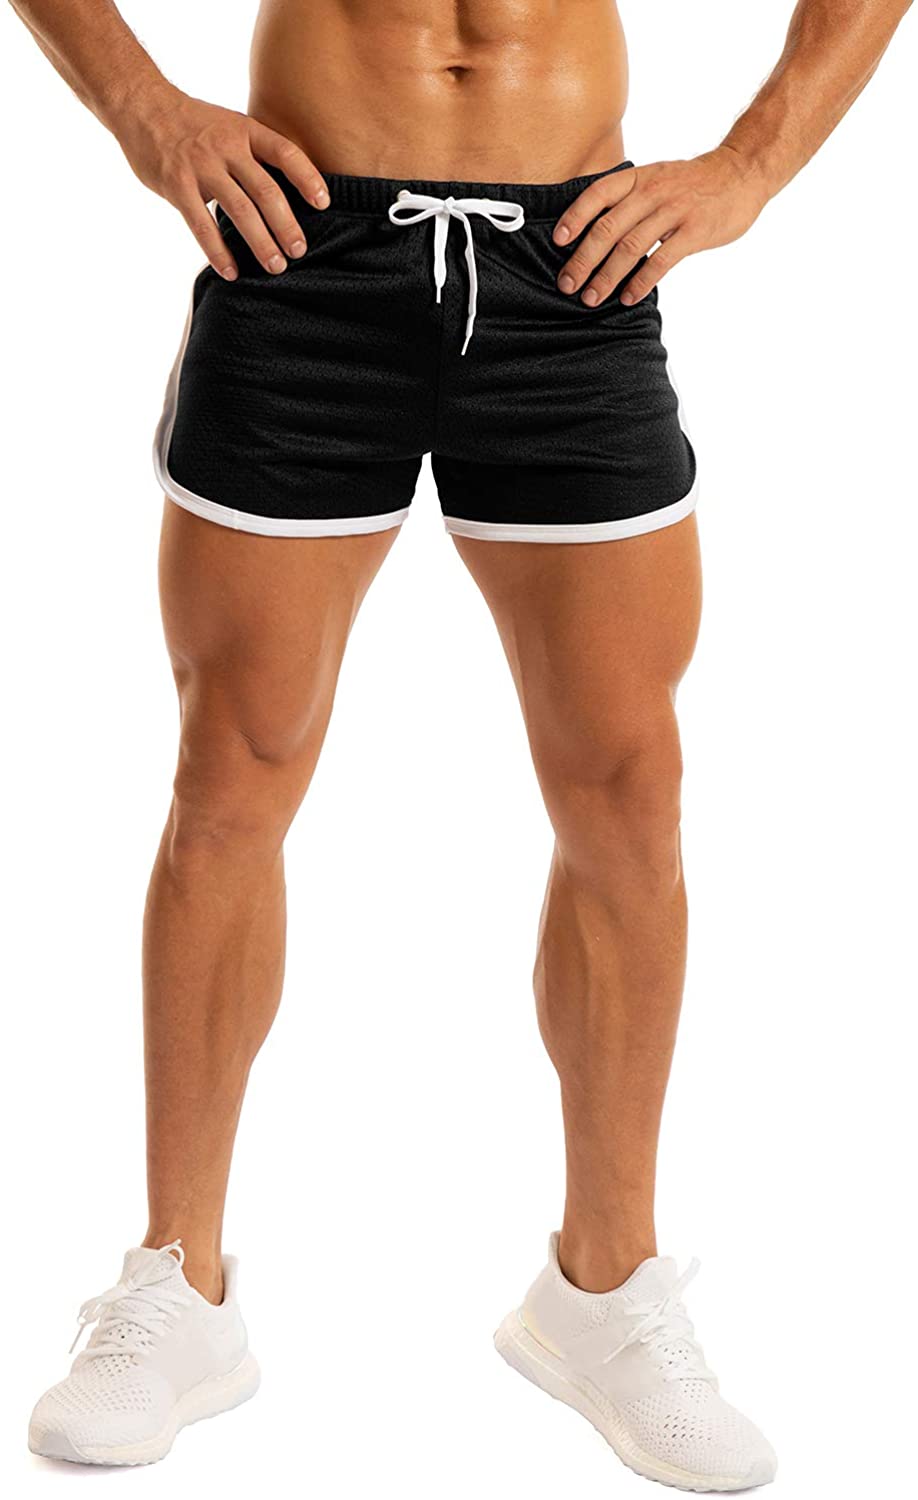 Wholesale Ouber Men's Fitted Shorts Bodybuilding Workout Gym